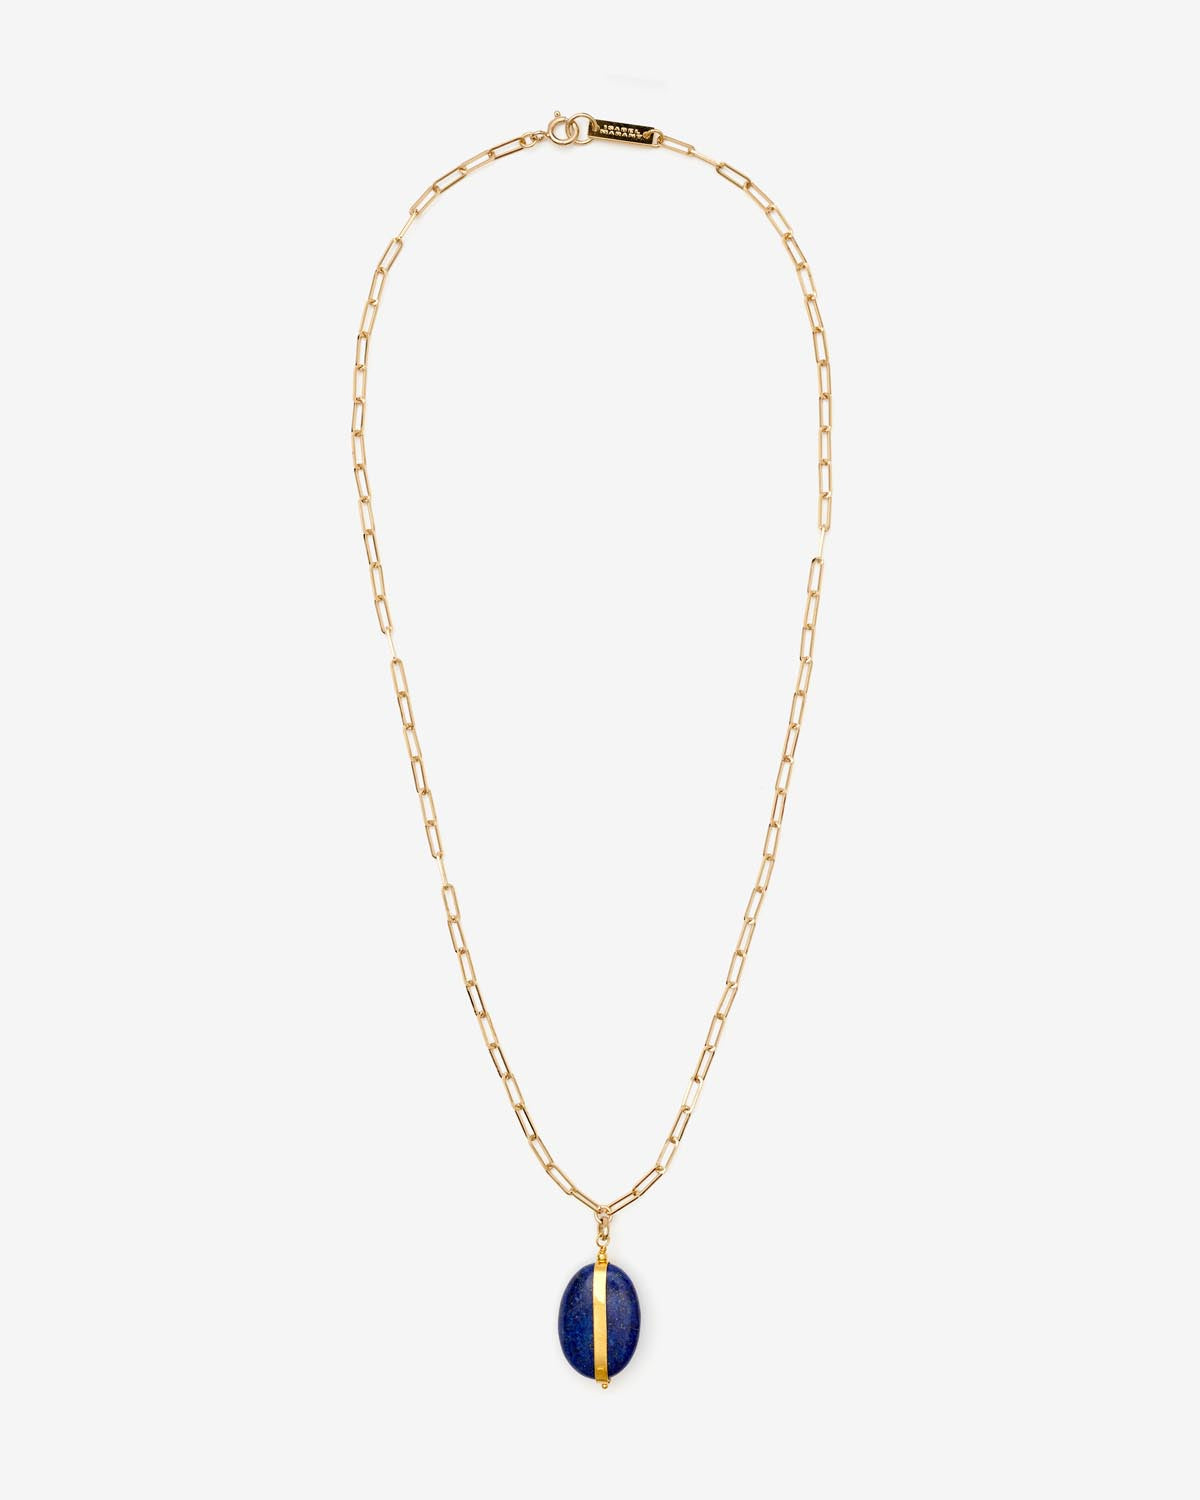 Stones necklace Woman Navy blue 3